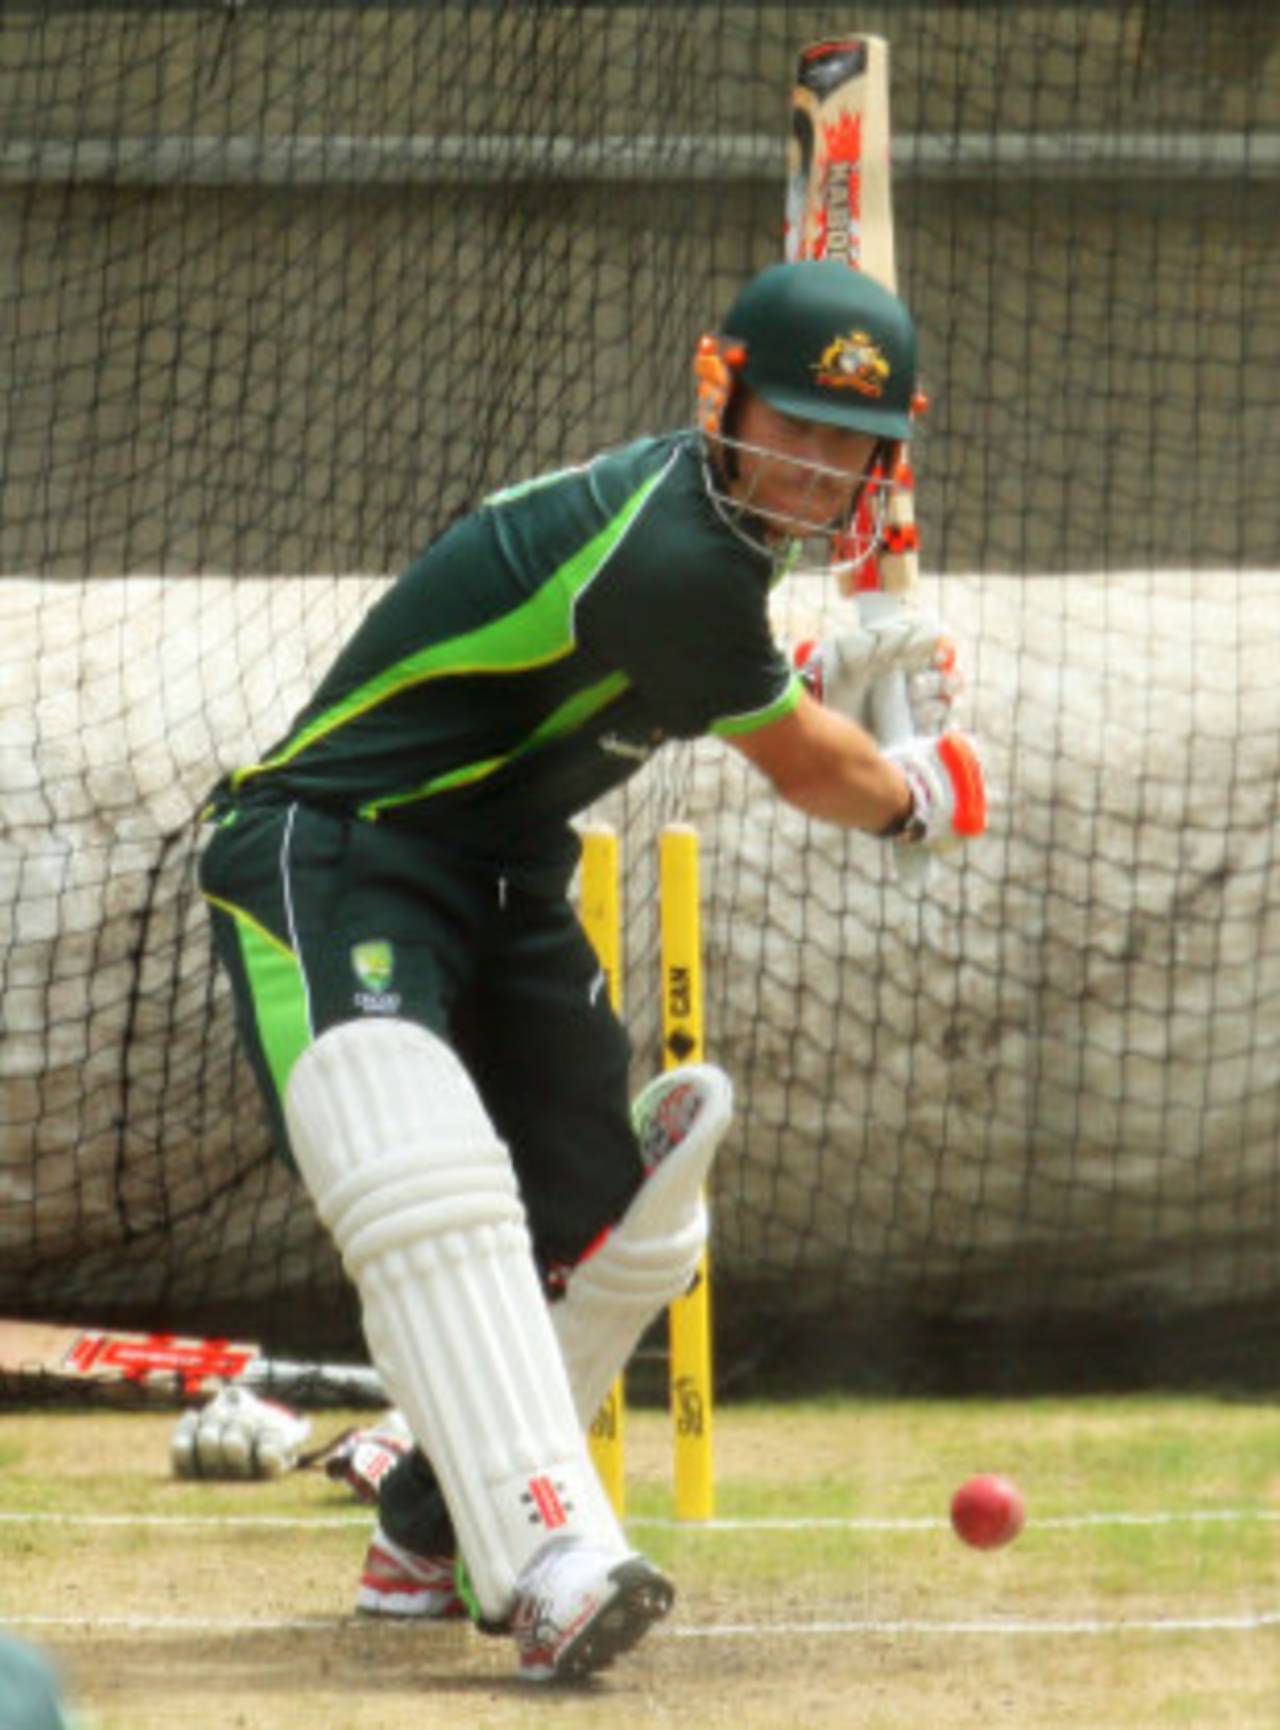 David Warner tested out his sore thumb in the nets, Melbourne, December 24, 2016